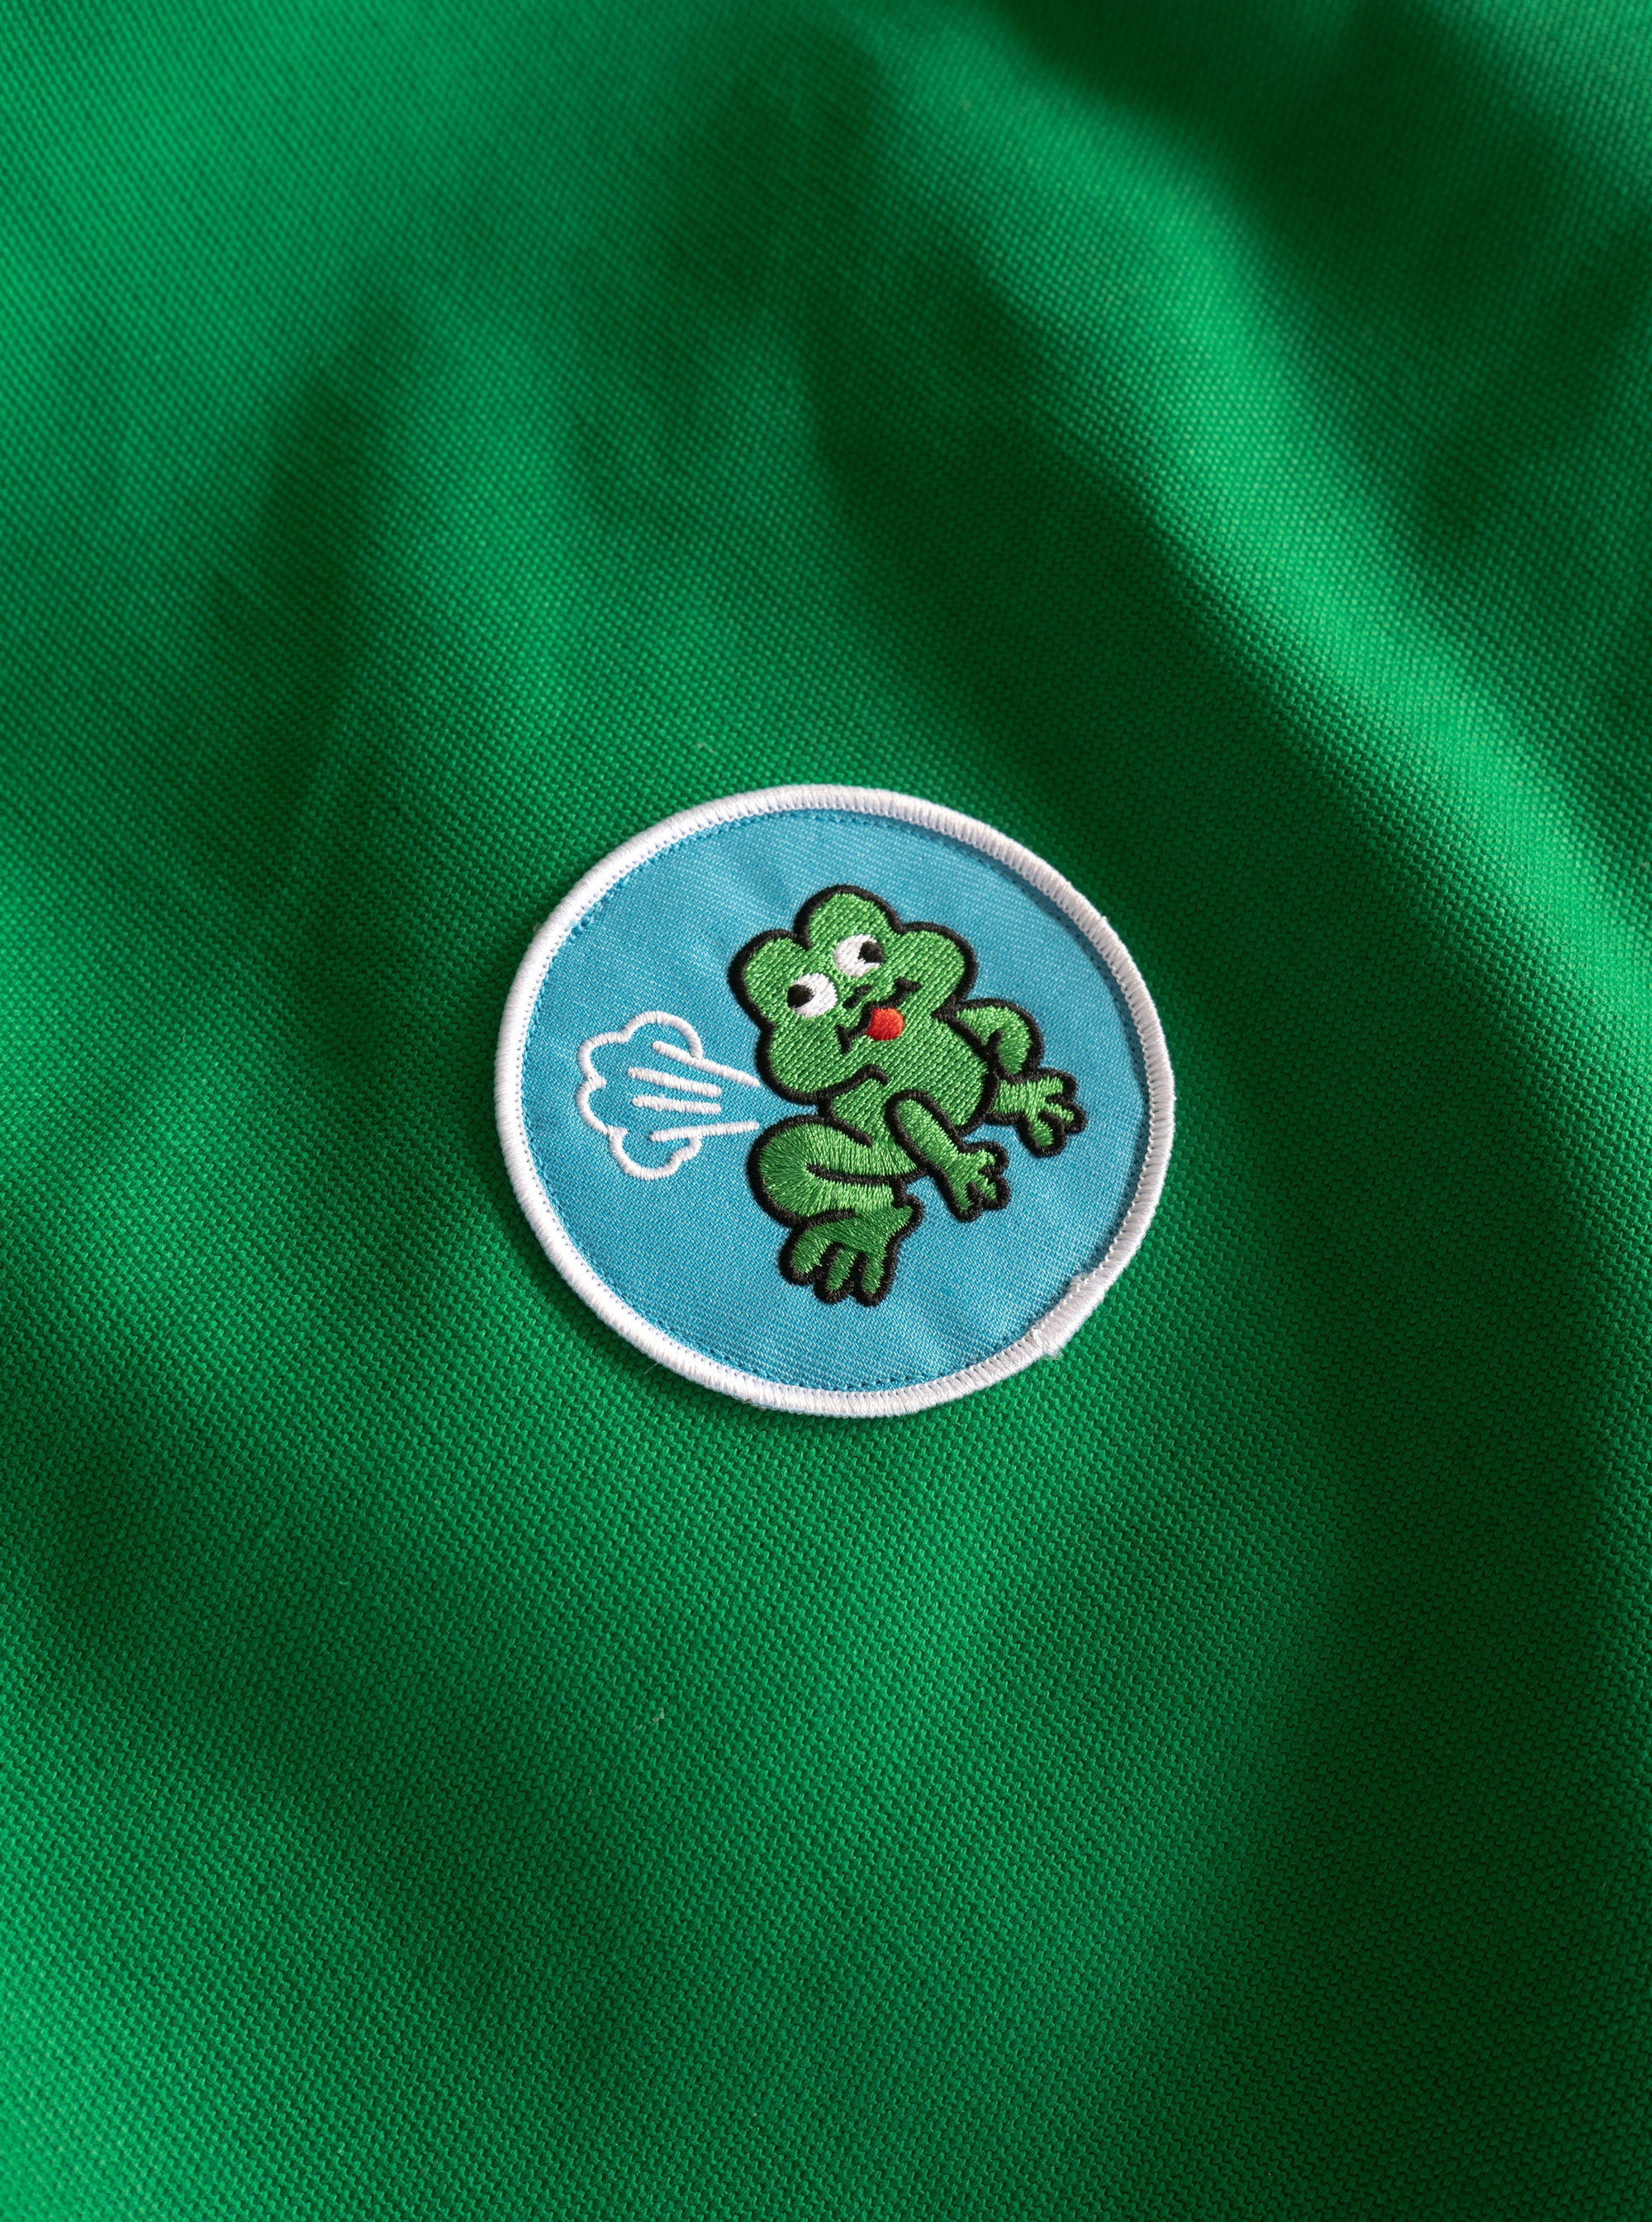 The "Farting Frog" patch on a piece of green canvas.